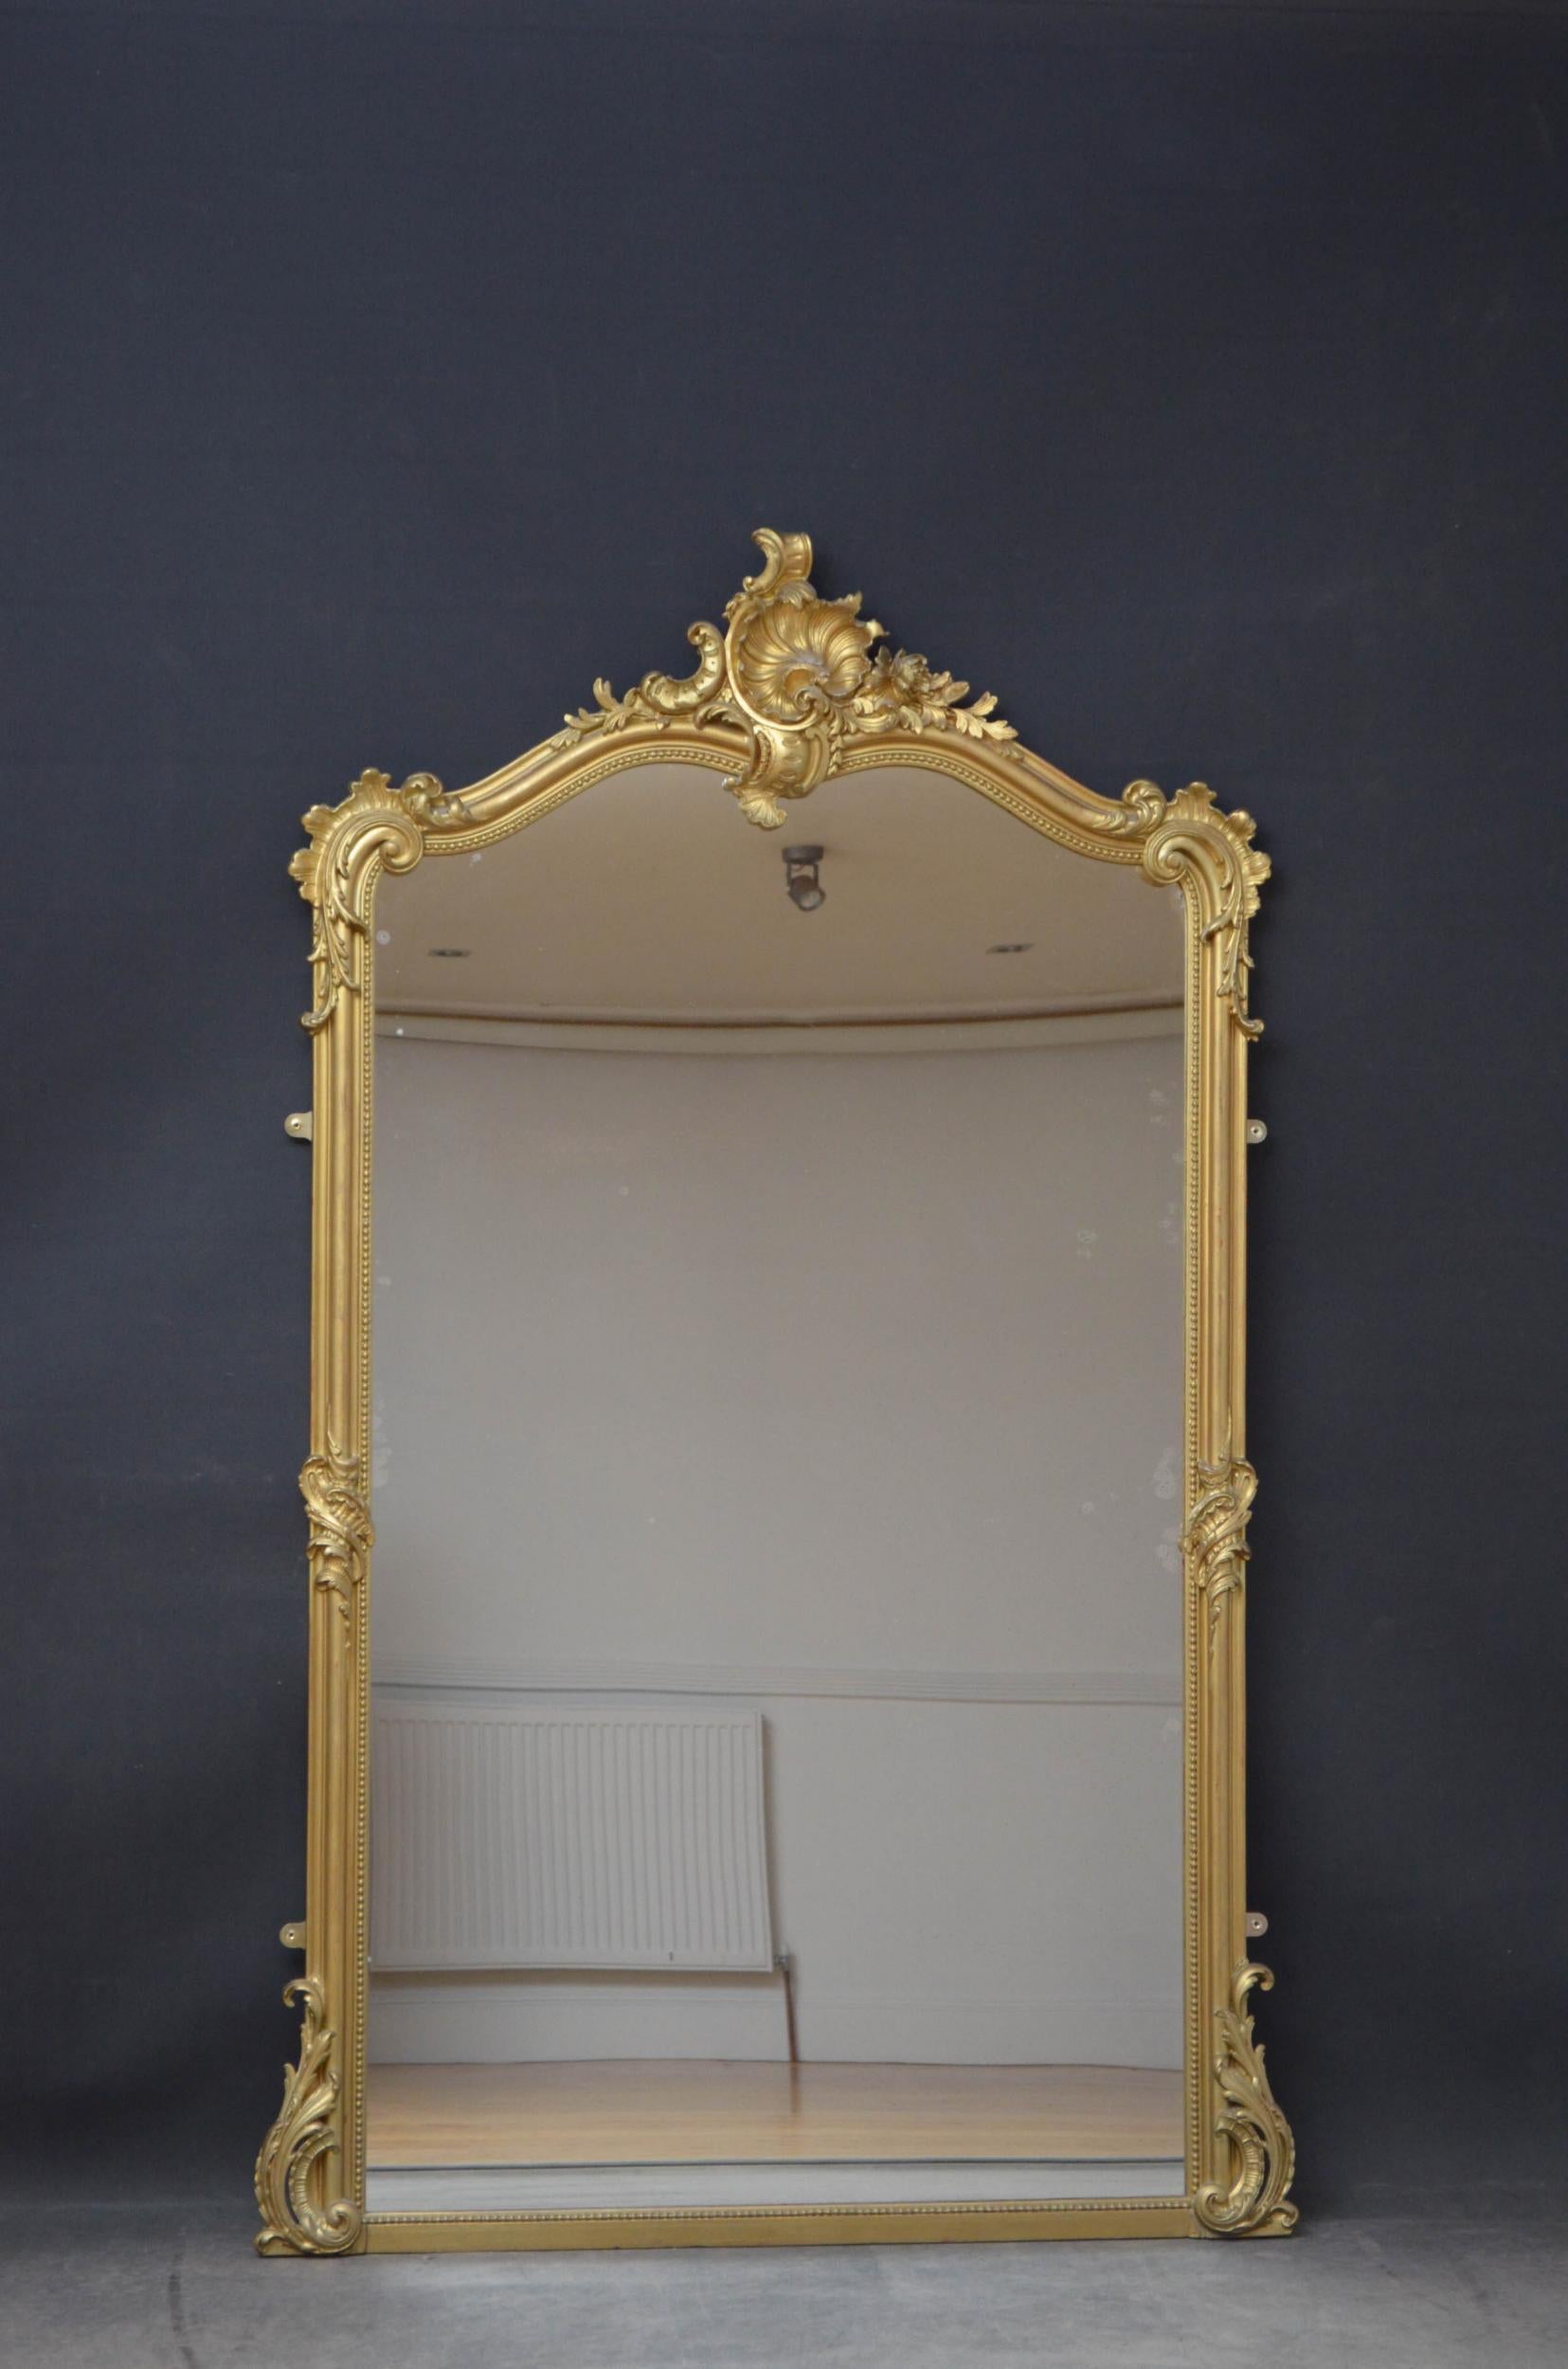 Sn4902 a large Louis XV style French giltwood wall mirror, having original glass with some imperfections in beaded, moulded and gilded frame with shell crest to the centre flanked by leafy scrolls to the top, centre and the base. This antique mirror